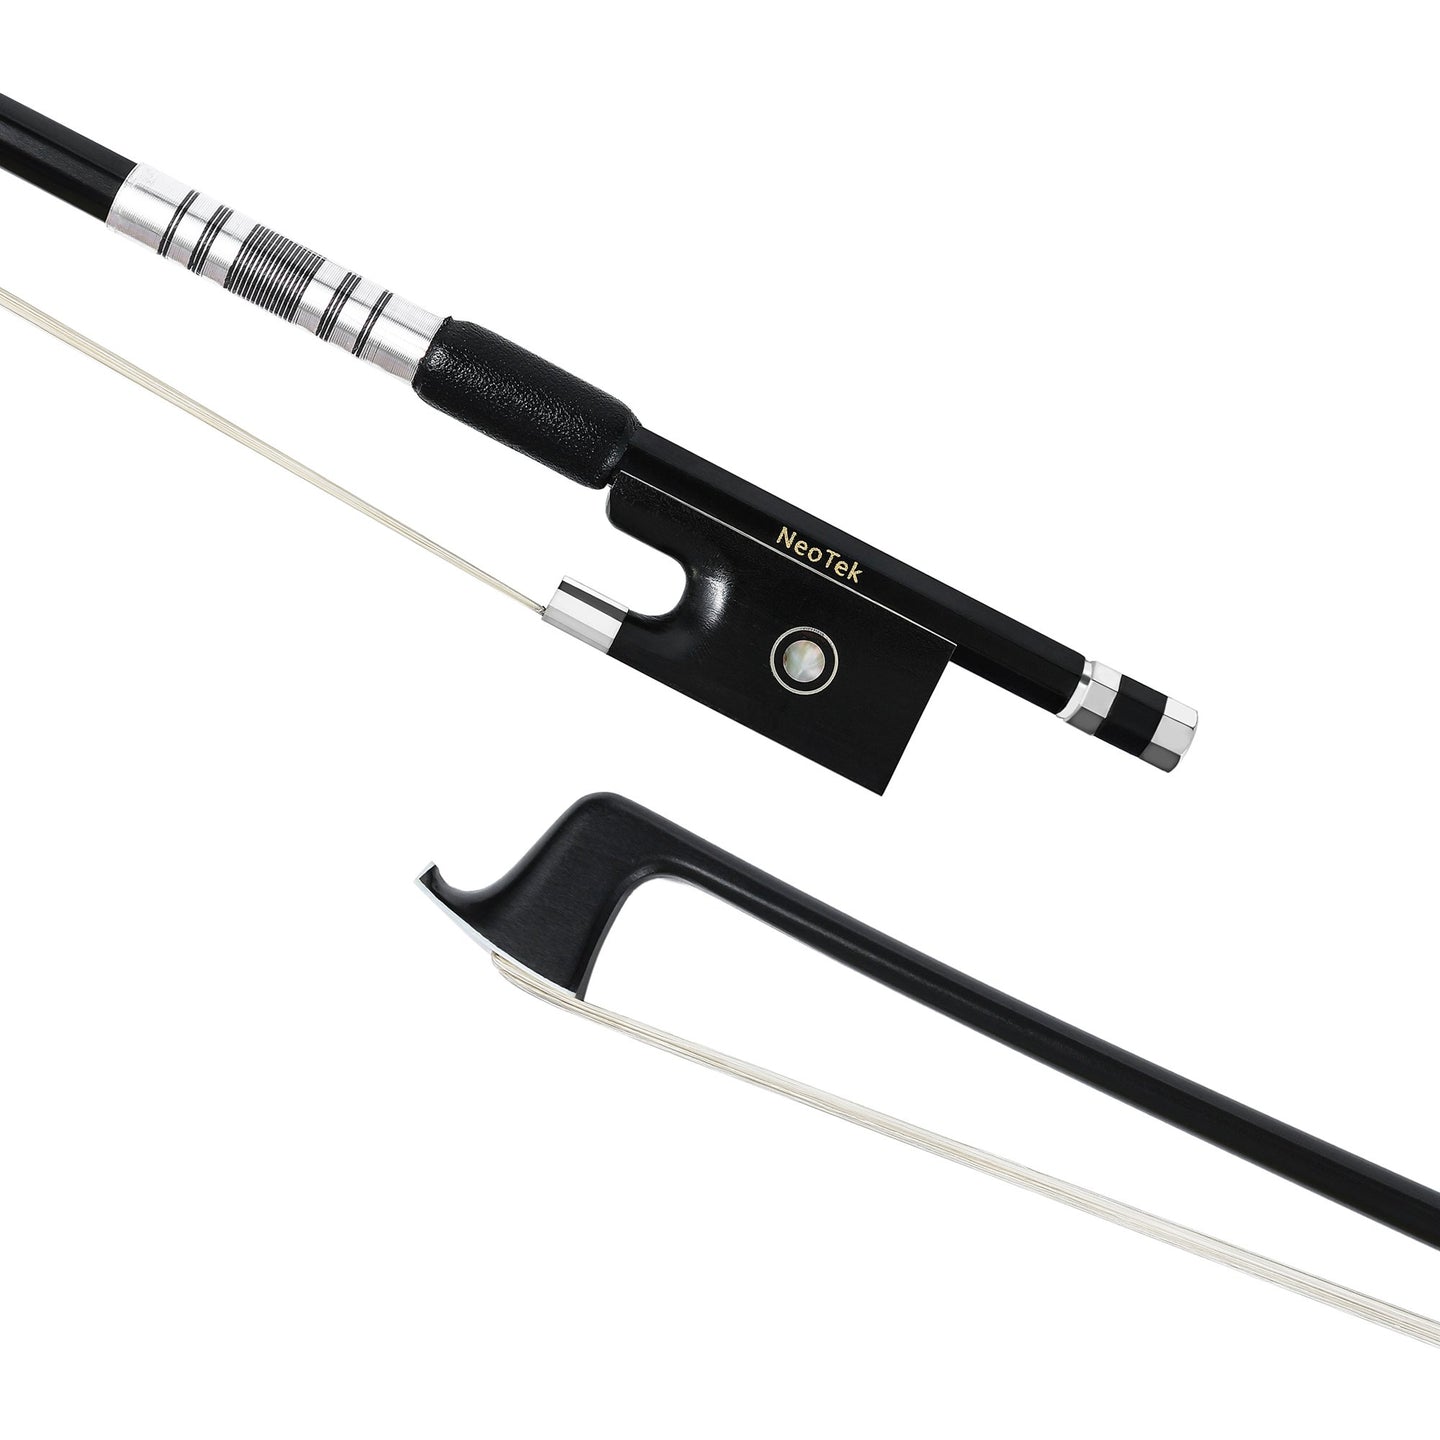 NeoTek Plus Carbon Fiber violin bow tip and fully-mounted Ebony frog front view, featuring black matte finish stick, Nickel Silver winding, Parisian eye, Abalone slide and white horsehair